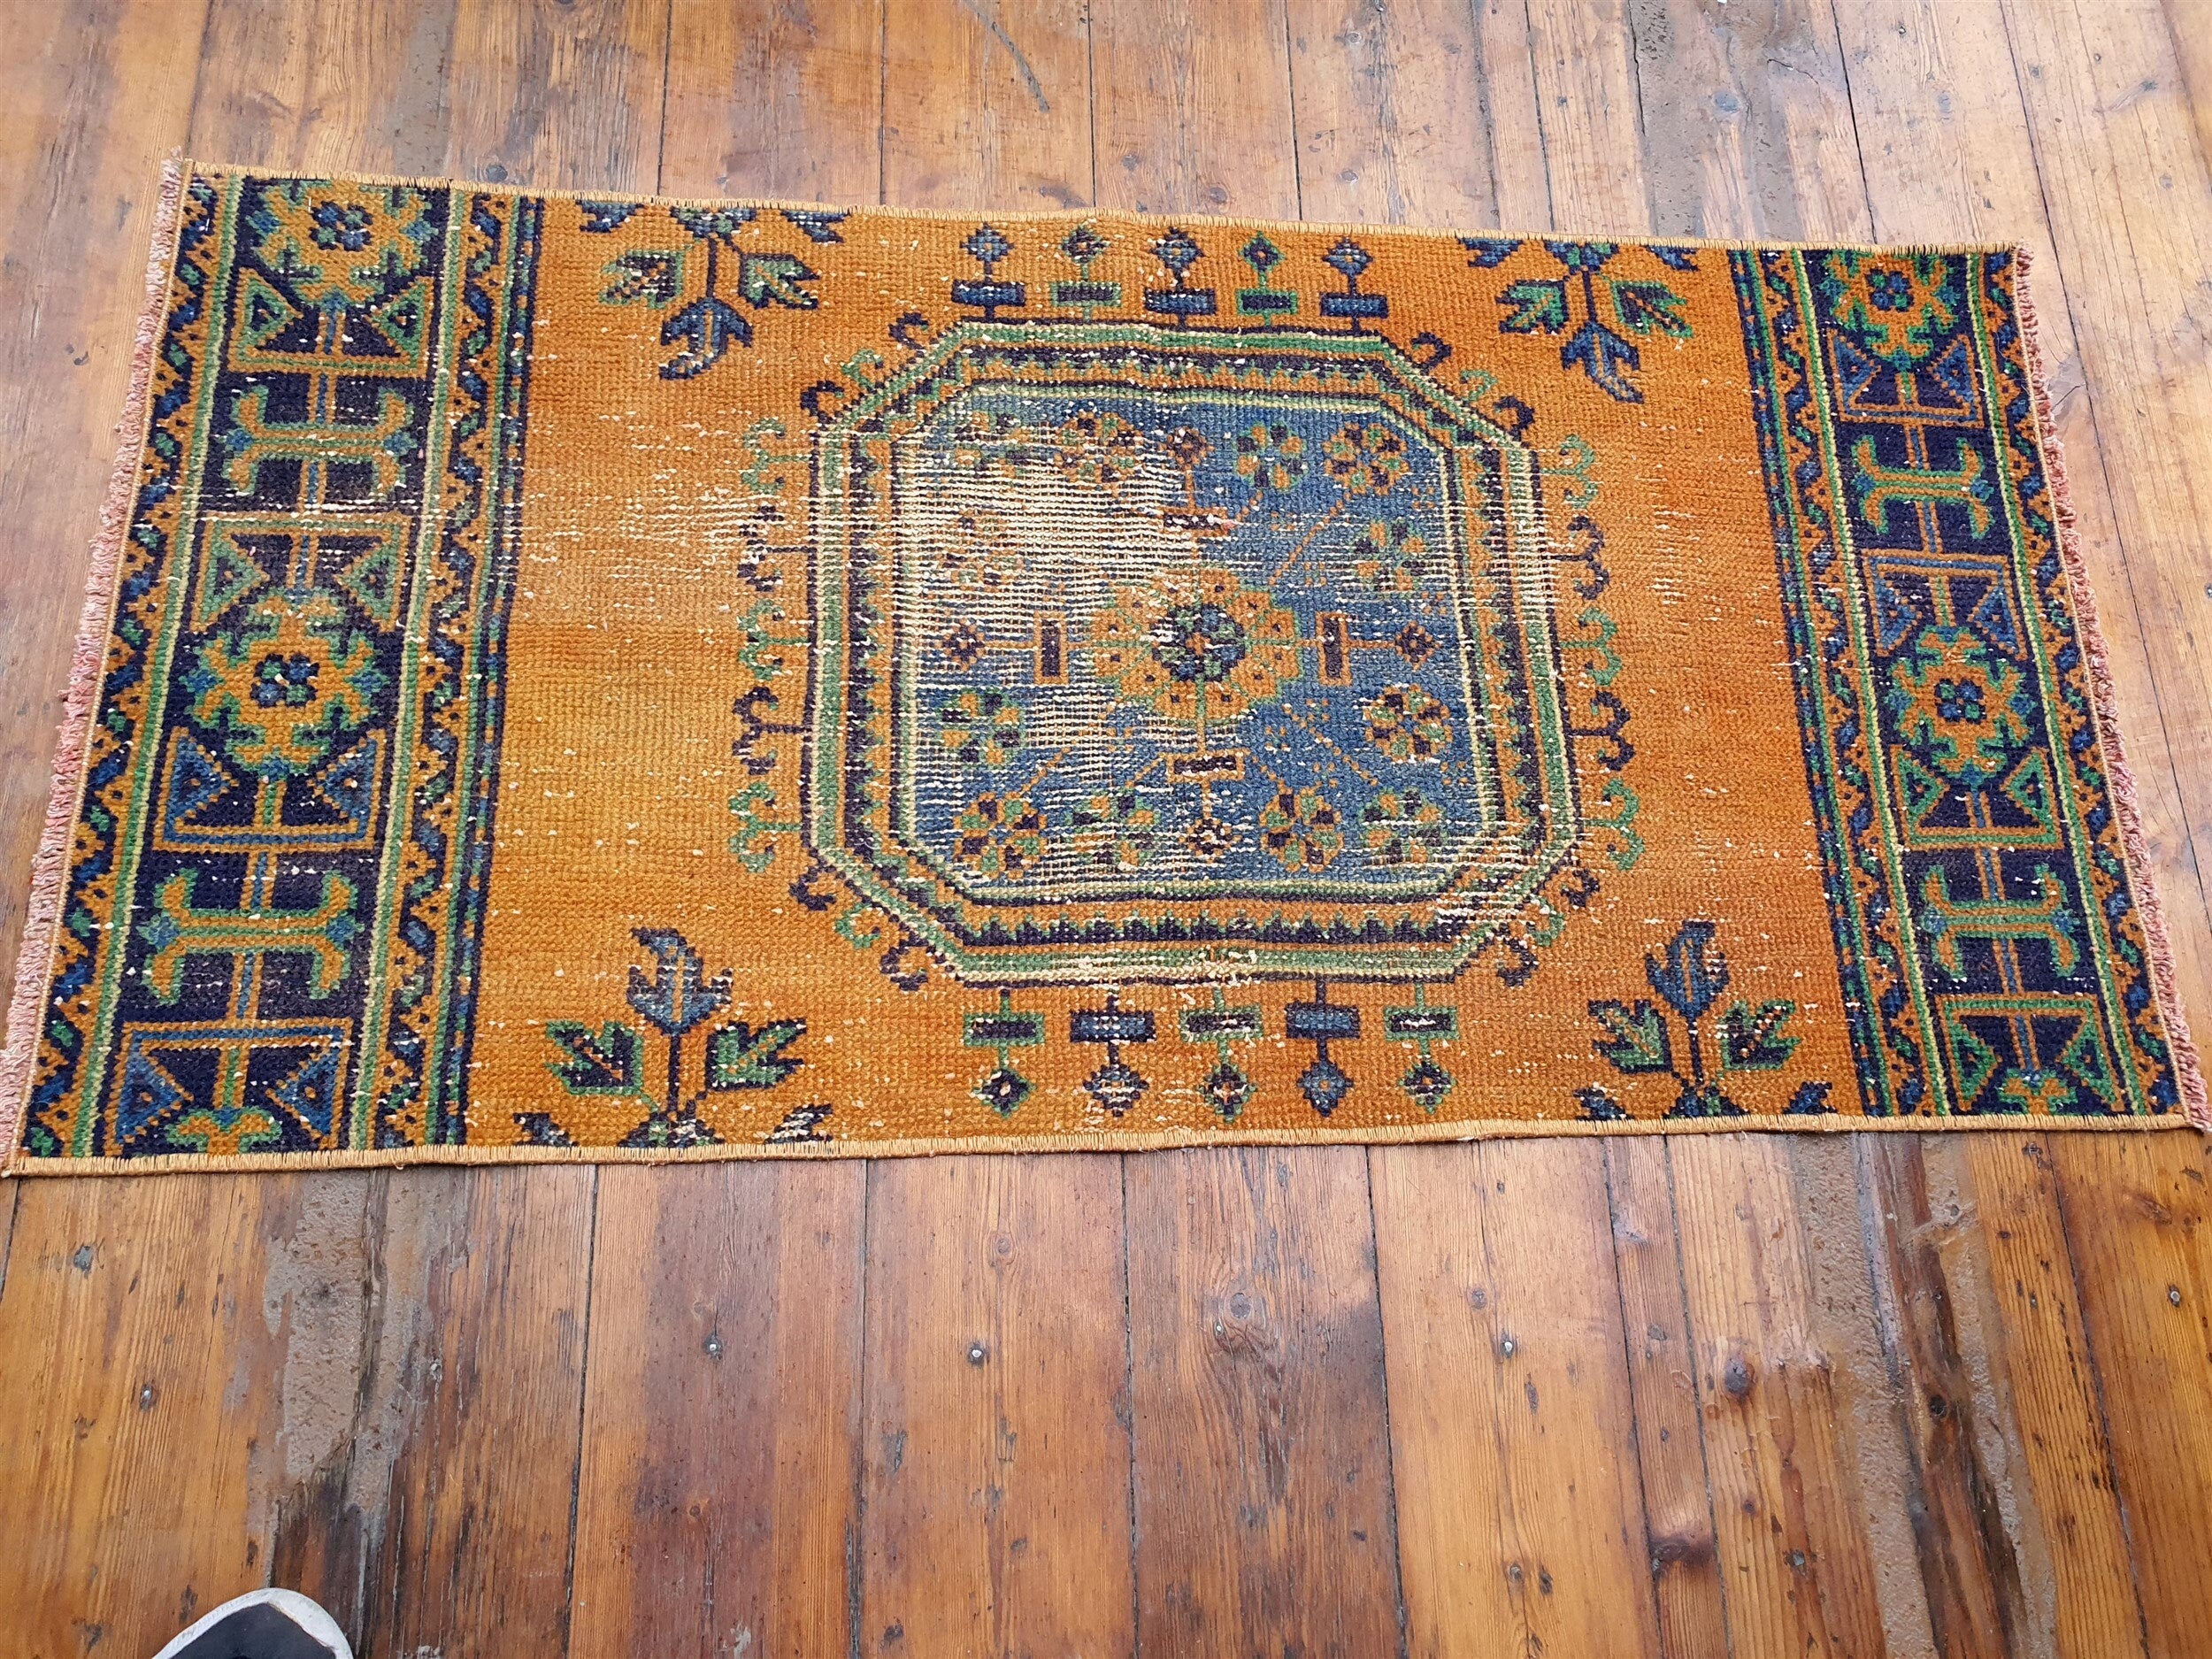 Small Turkish Rug, 4 ft 1 in x 1 ft 8 in, Apricot Orange and Teal Green / Grey Vintage Faded Distressed Door Mat